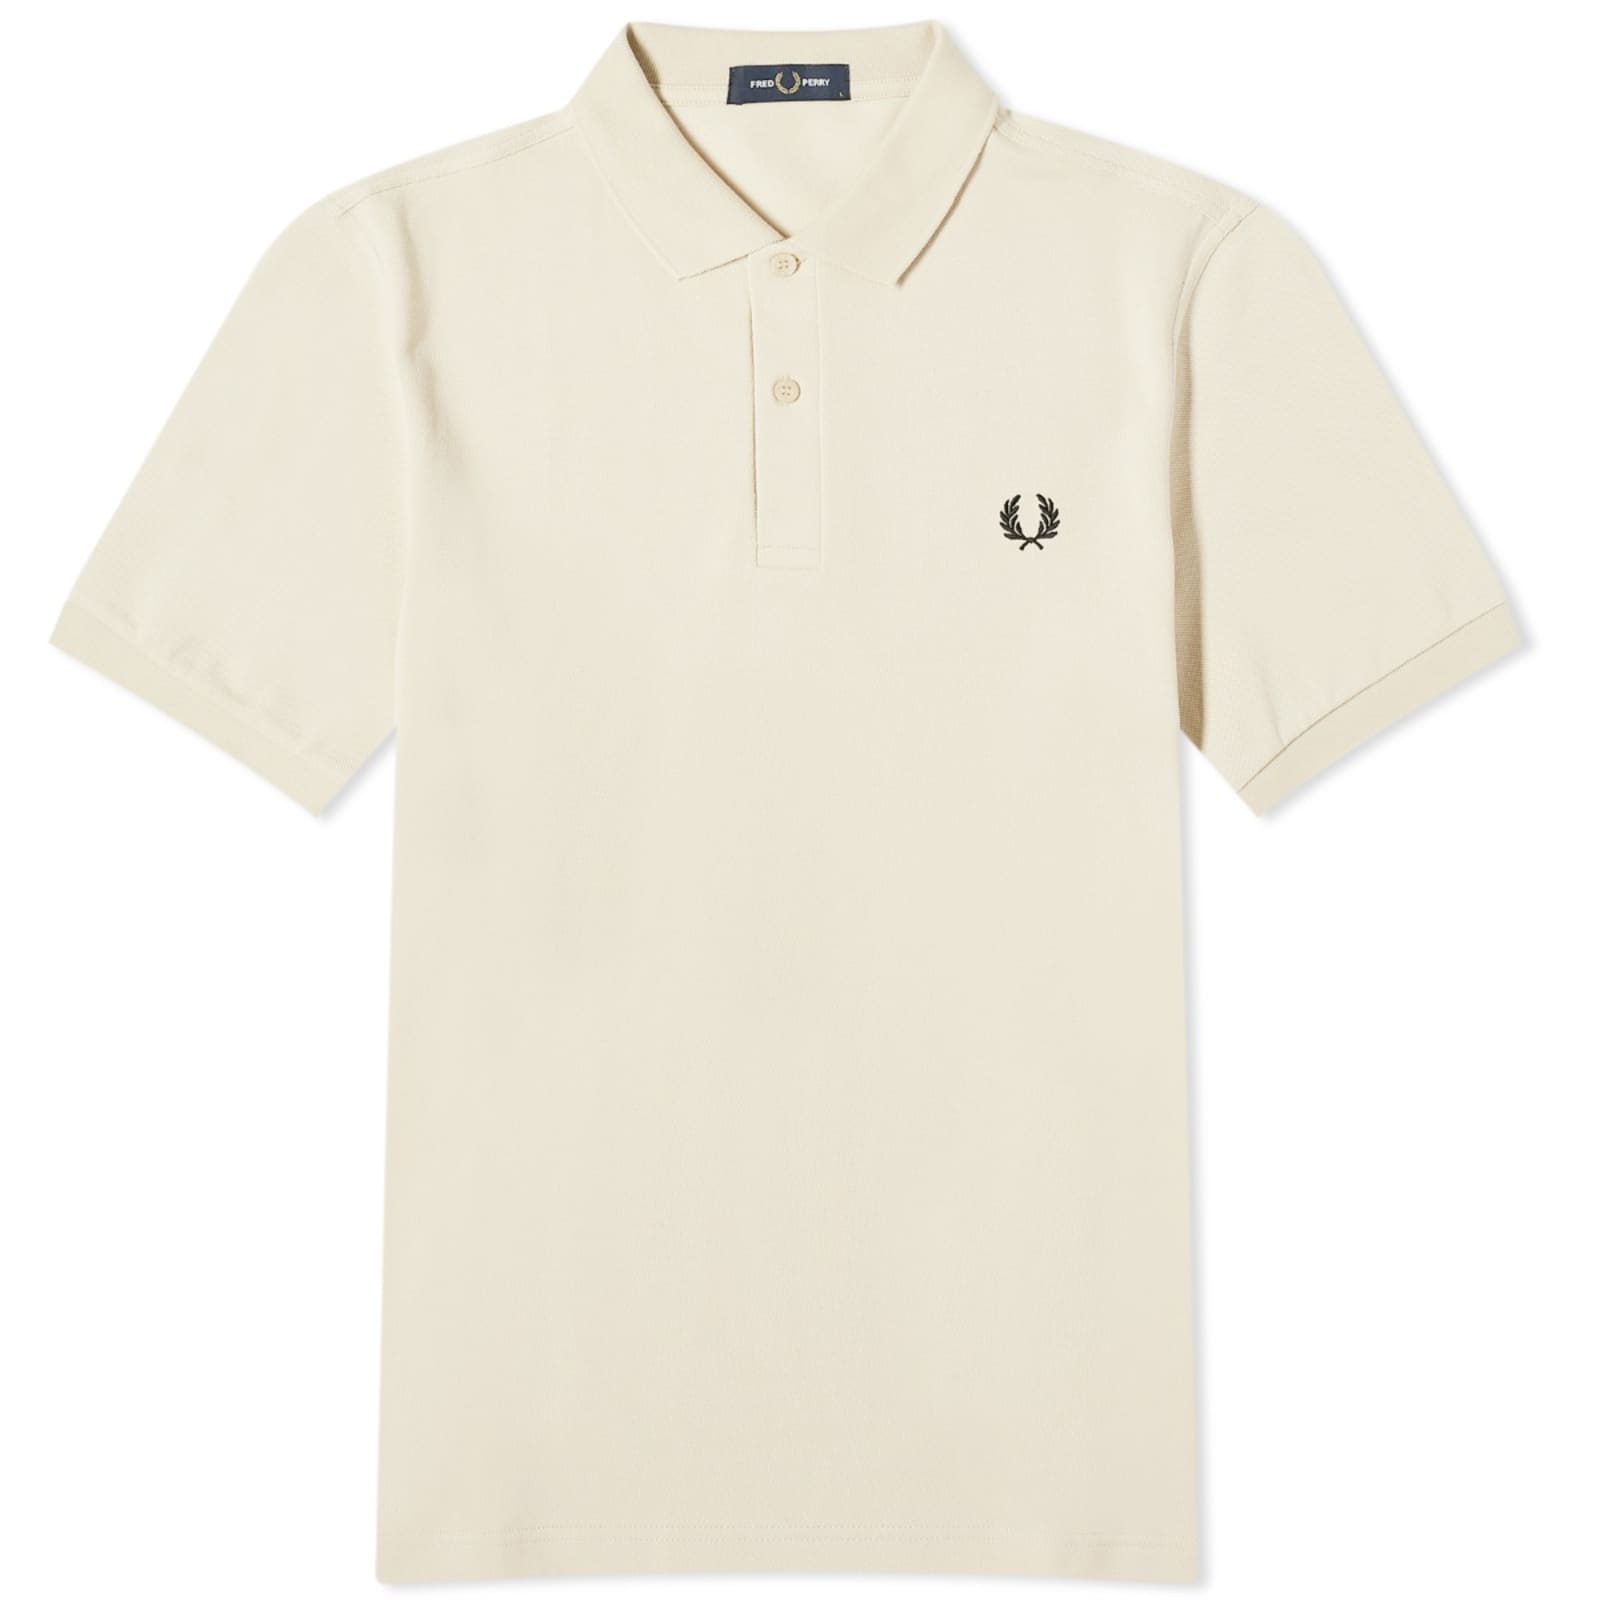 Поло Fred Perry Plain, цвет Oatmeal рубашка fred perry panel polo цвет whisky brown